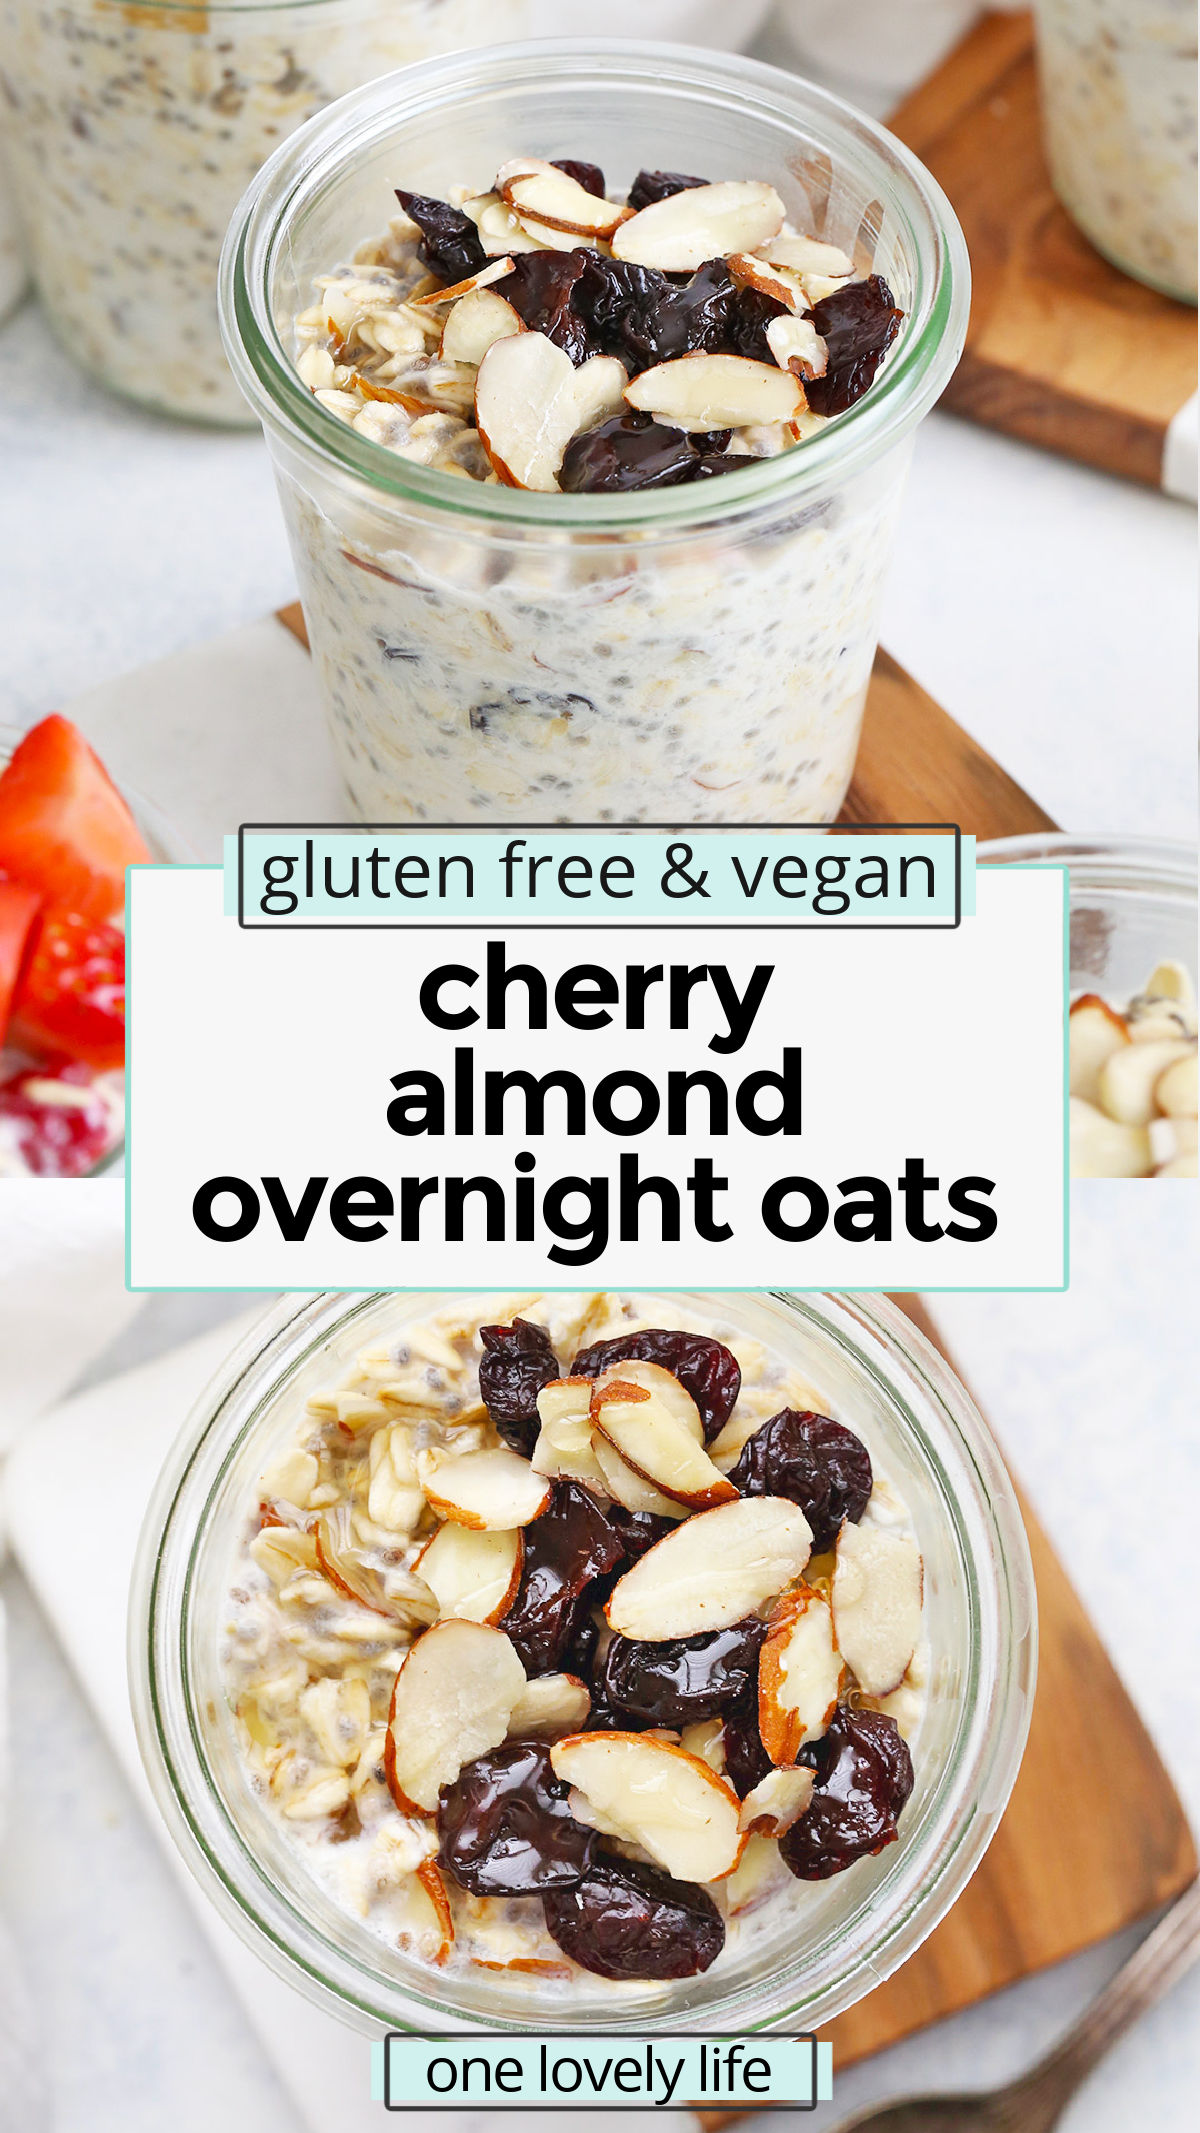 Cherry Almond Overnight Oats - Creamy overnight oats loaded with tangy cherries and crunchy almonds. This yummy overnight oats recipe is one of our favorites! (Gluten-free, vegan) // Meal Prep Breakfast // Cherry Overnight Oats // Healthy Breakfast // Cherry Overnight oatmeal